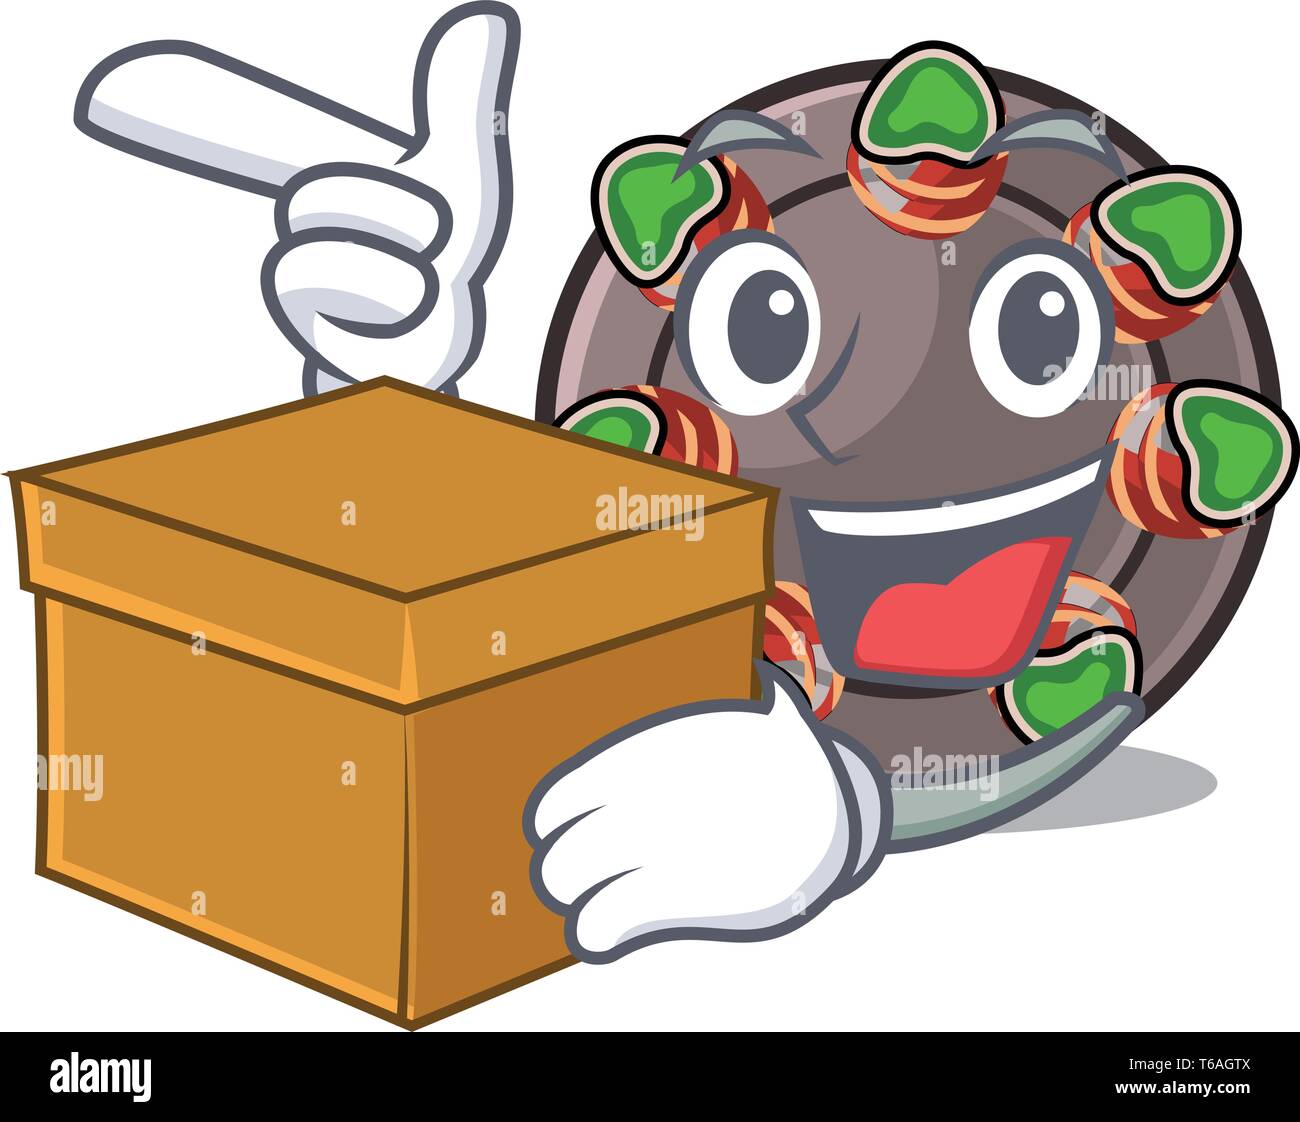 With box escargot is presented on character plates Stock Vector